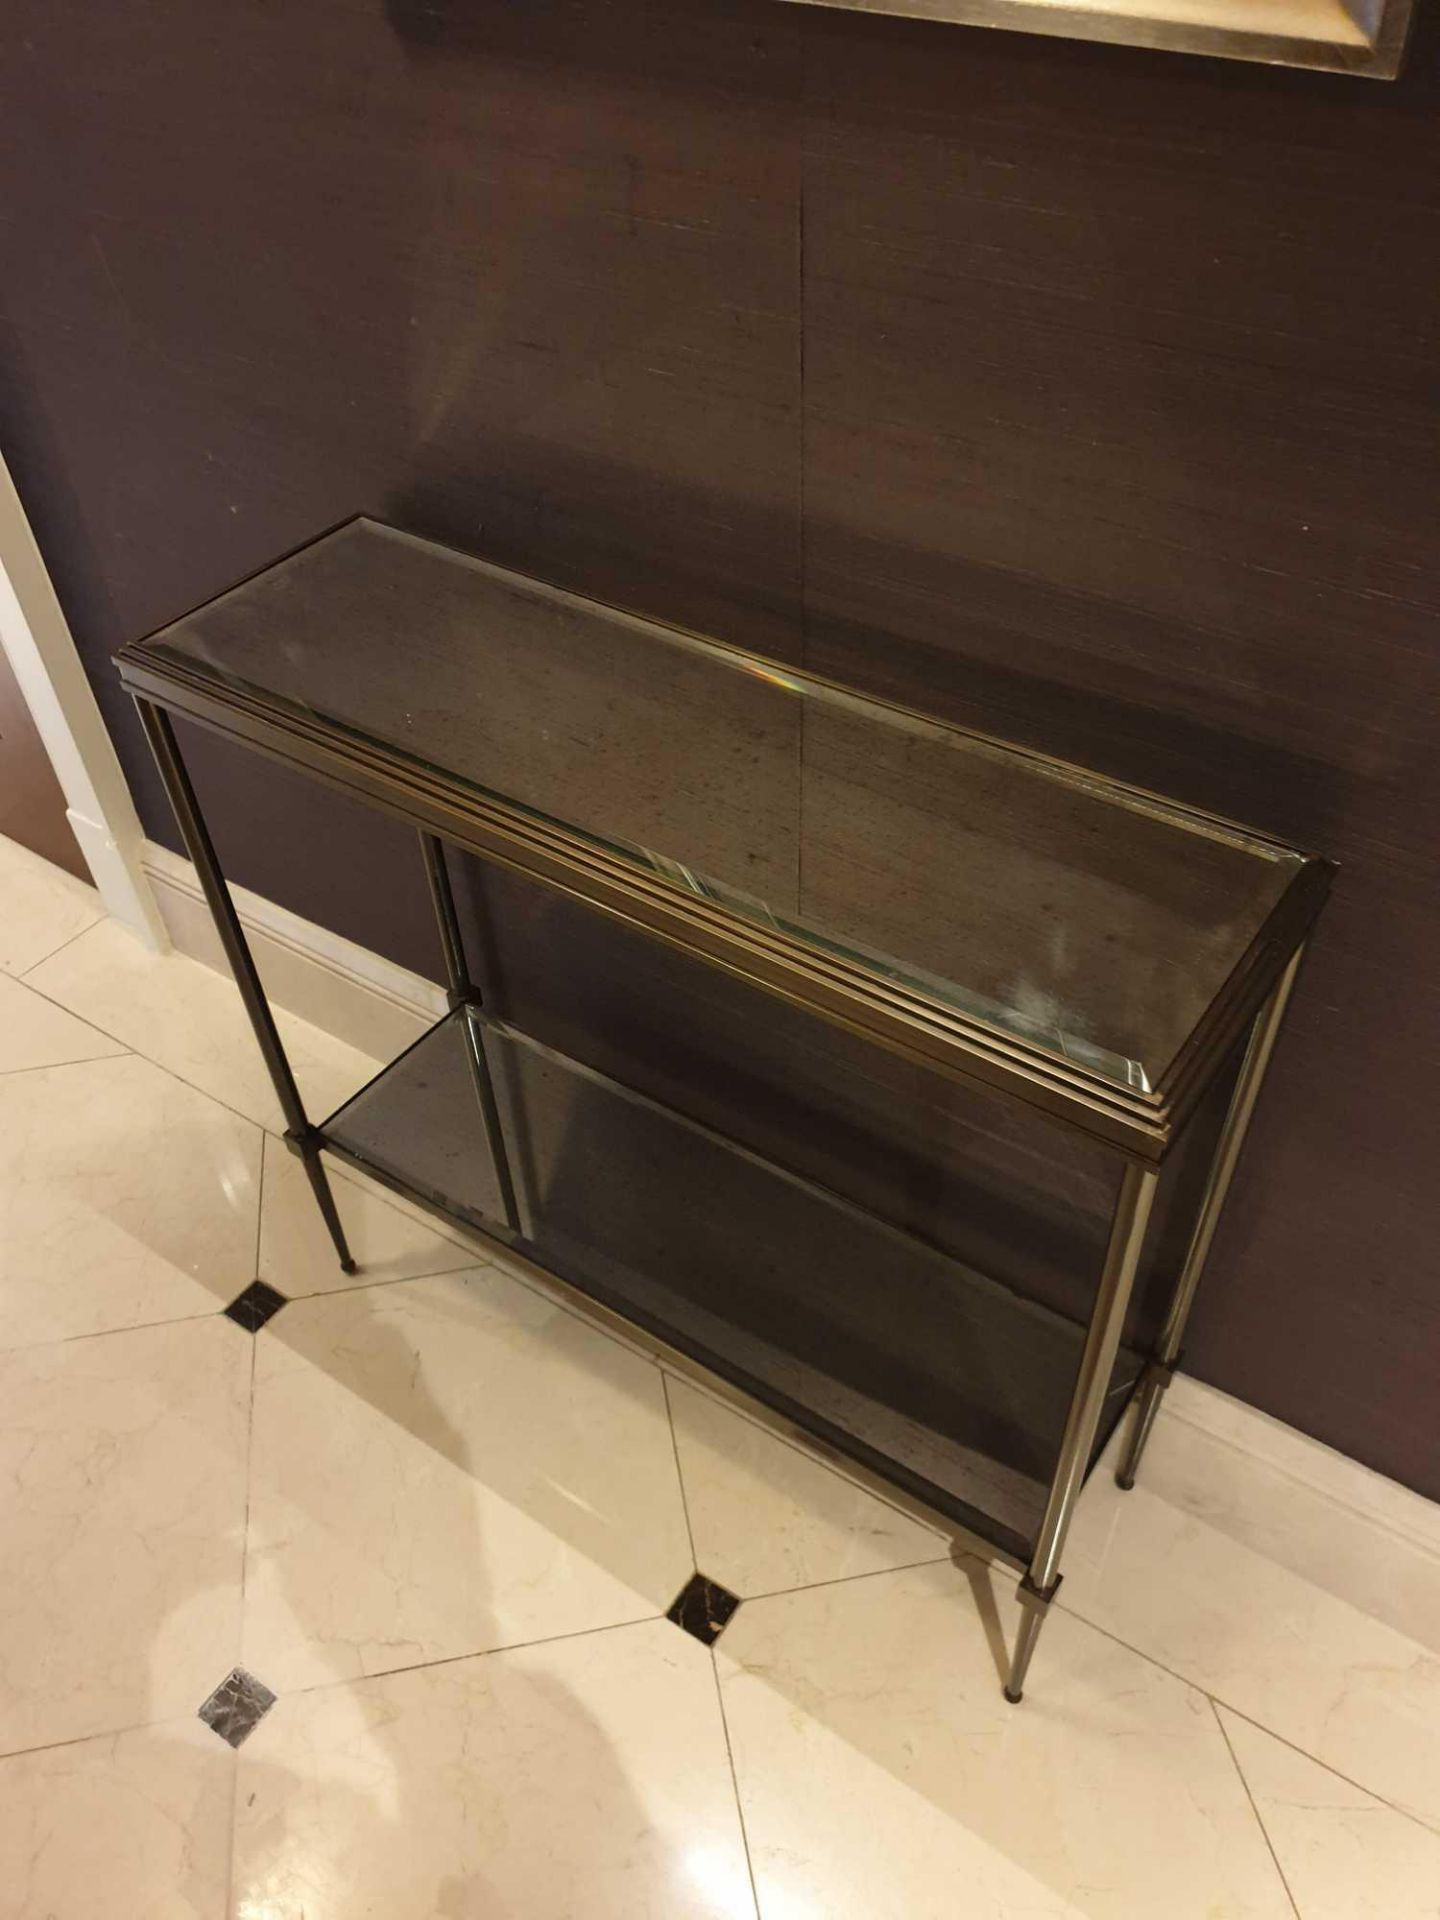 A Forged Metal Two Tier Console Table With Glass Shelves 88 x 24 x 74cm (Room 728)